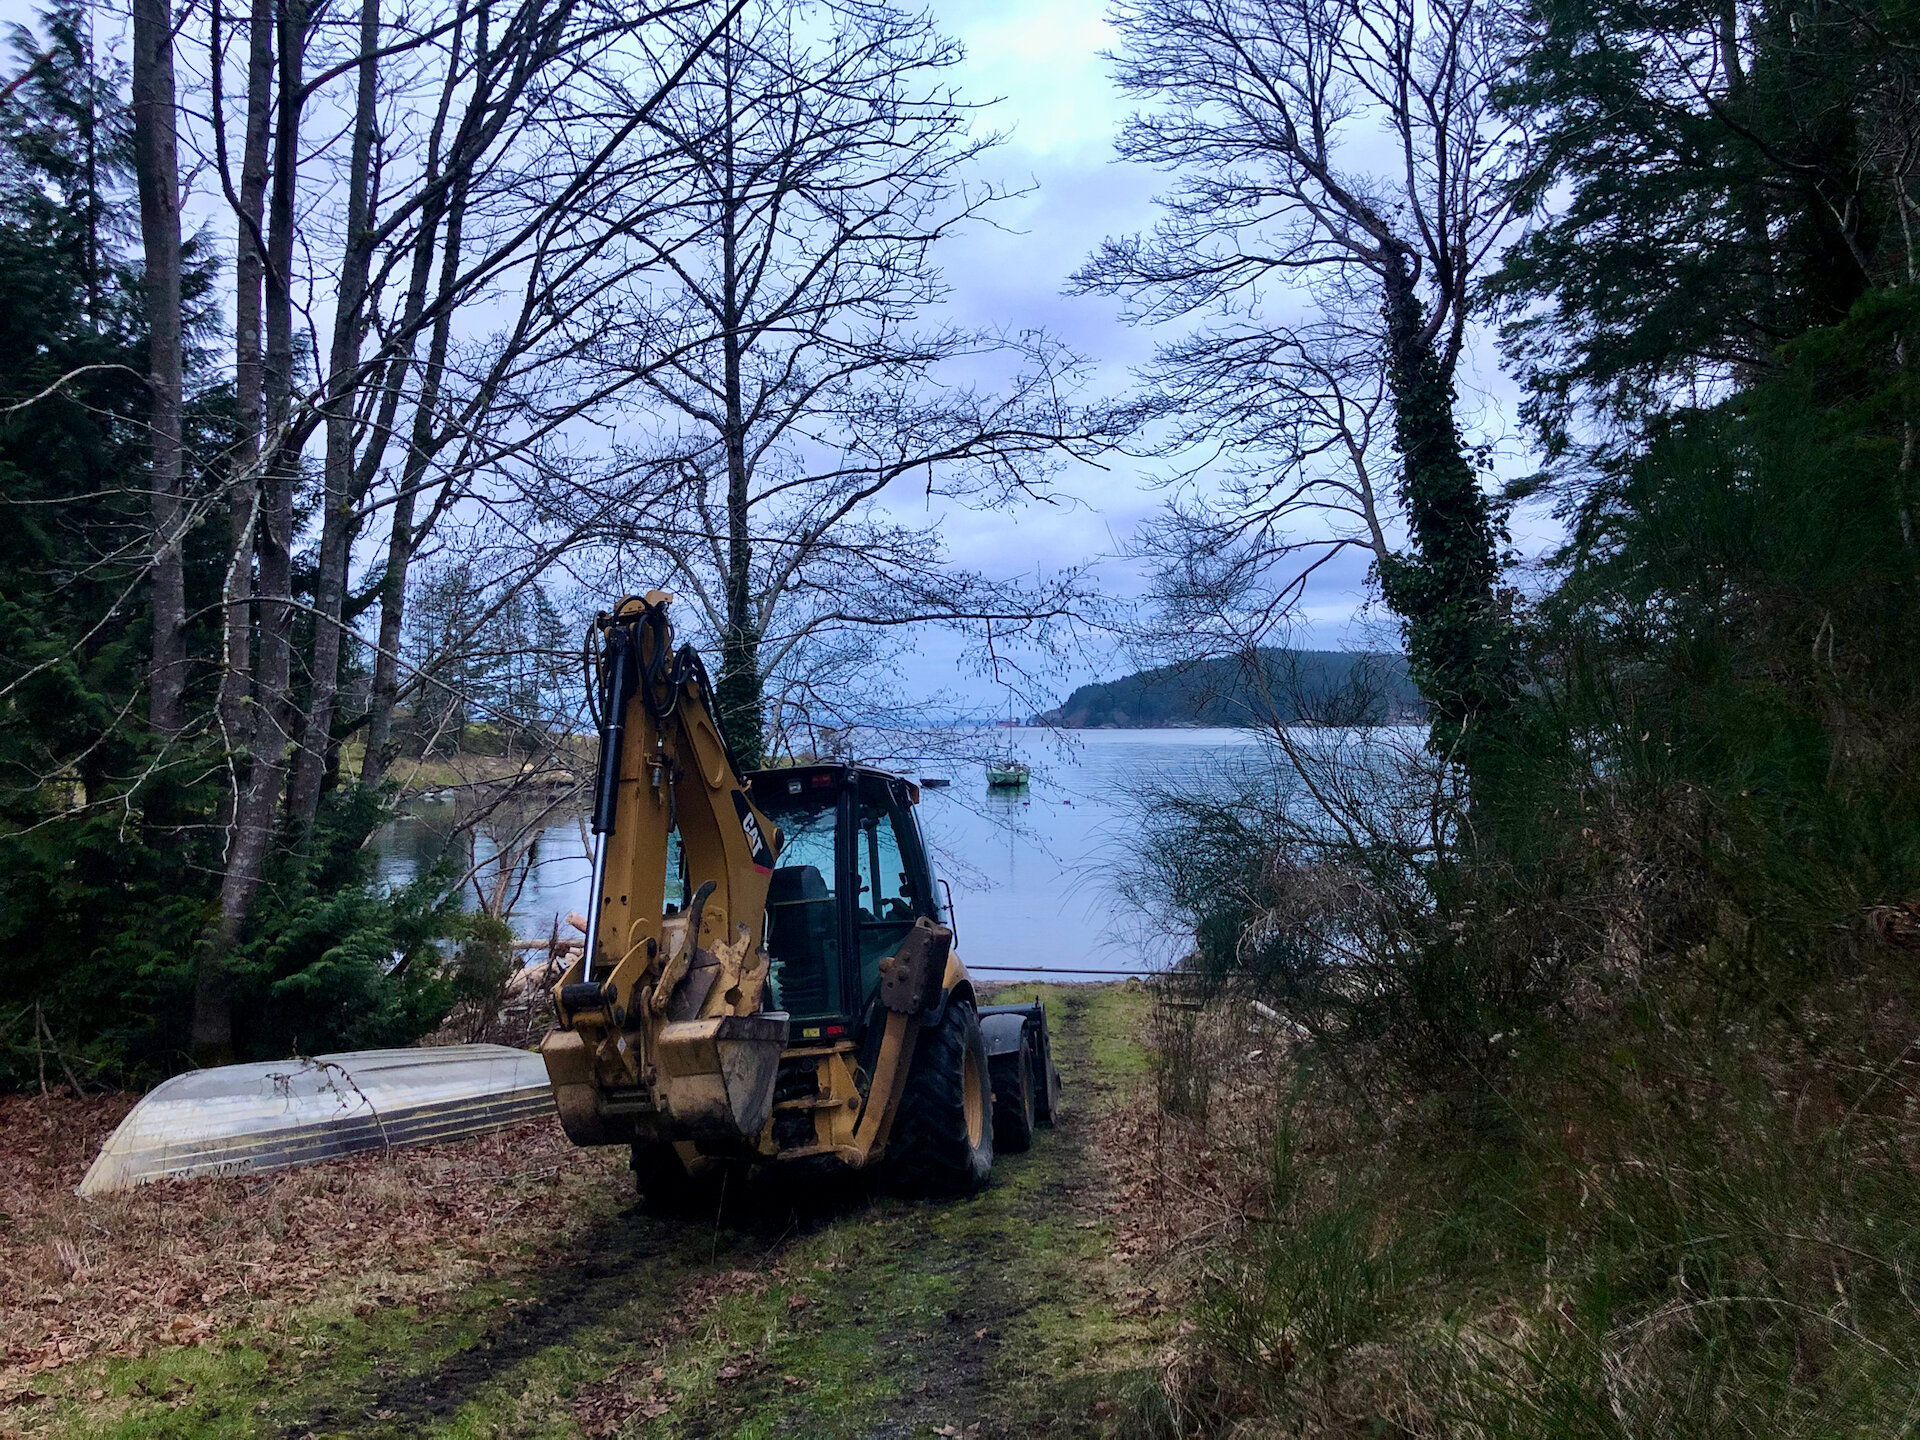  Galiano Excavating provided a backhoe to help us at the landing site. Prior to the barge arriving he did a bit of clean up to clear tree branches and make the site a little better.  We ended up really needing it… 